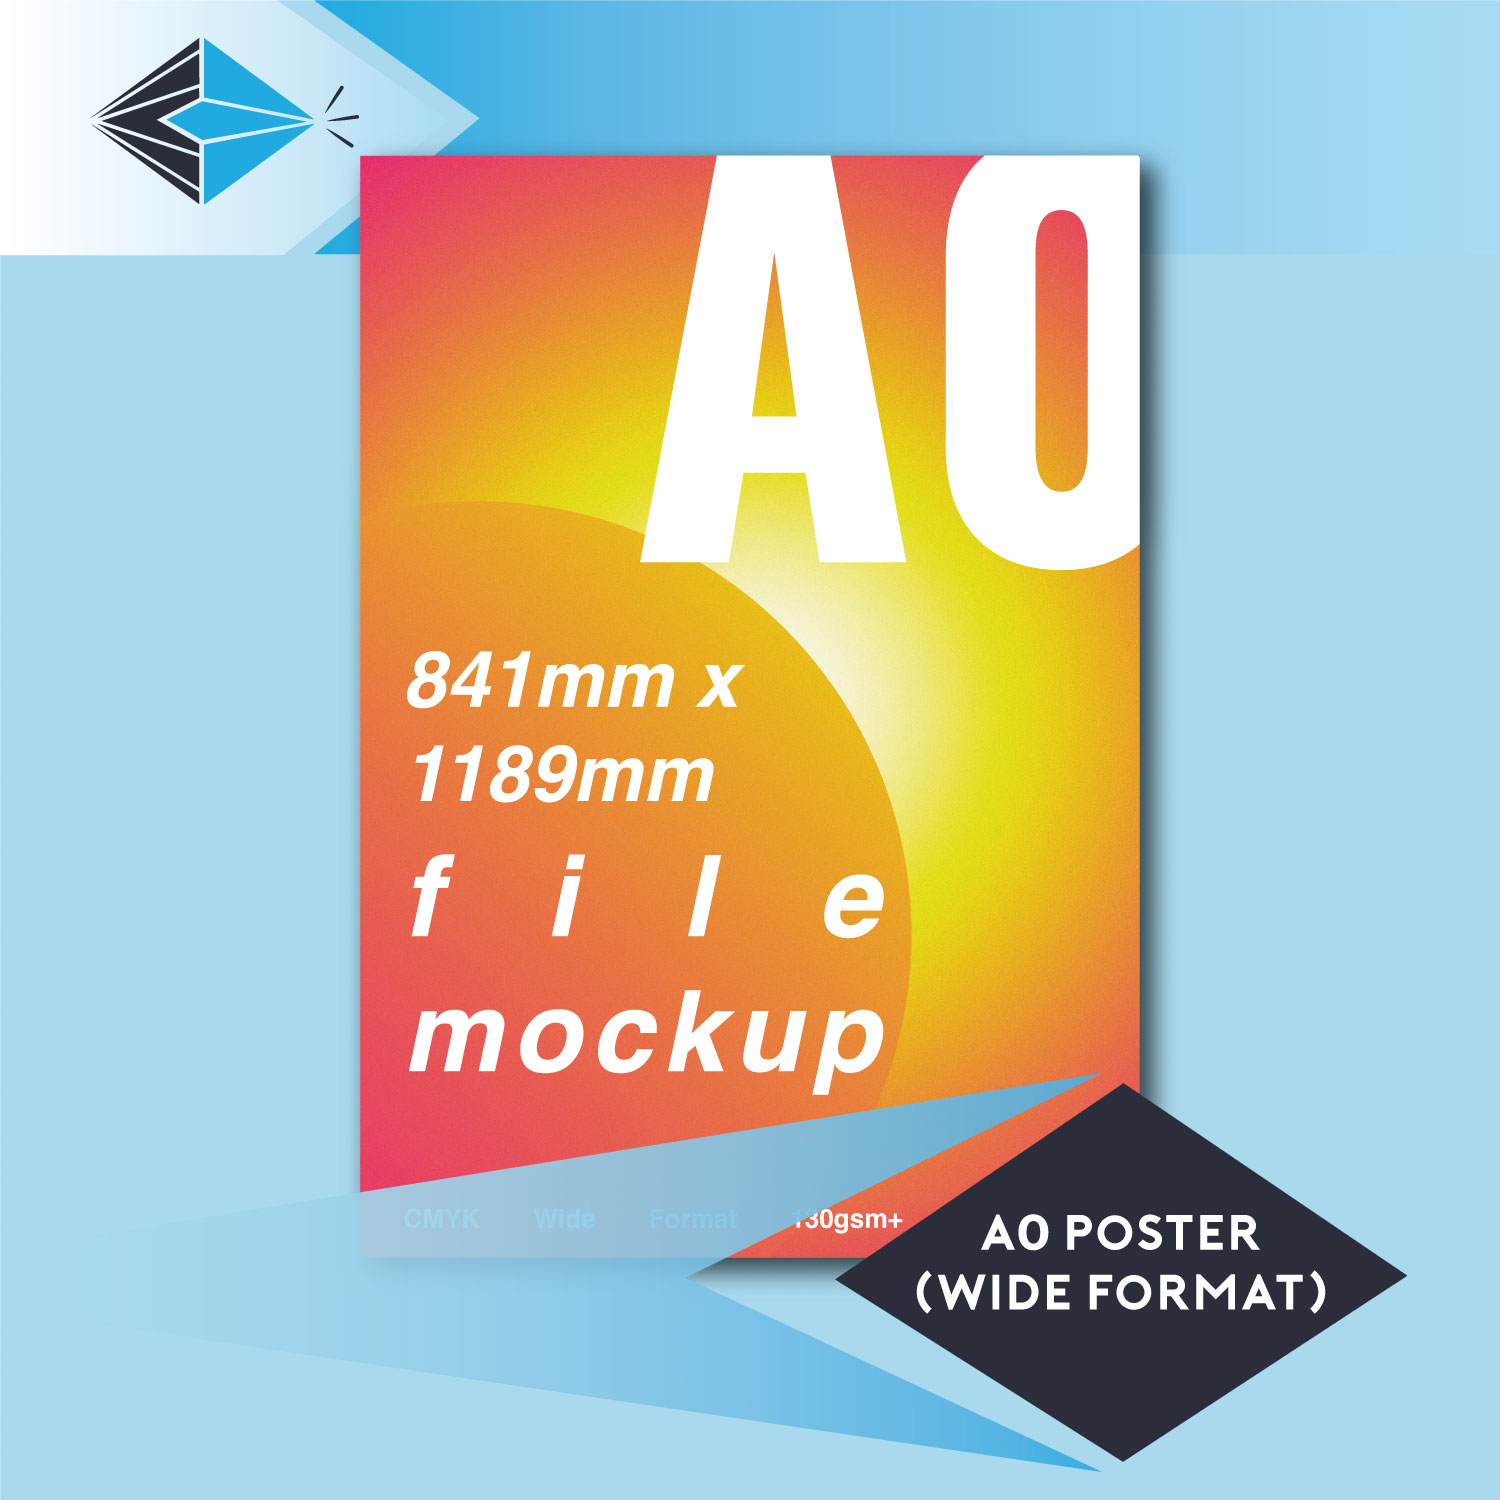 Standard A0 Poster Printing - Wide Format